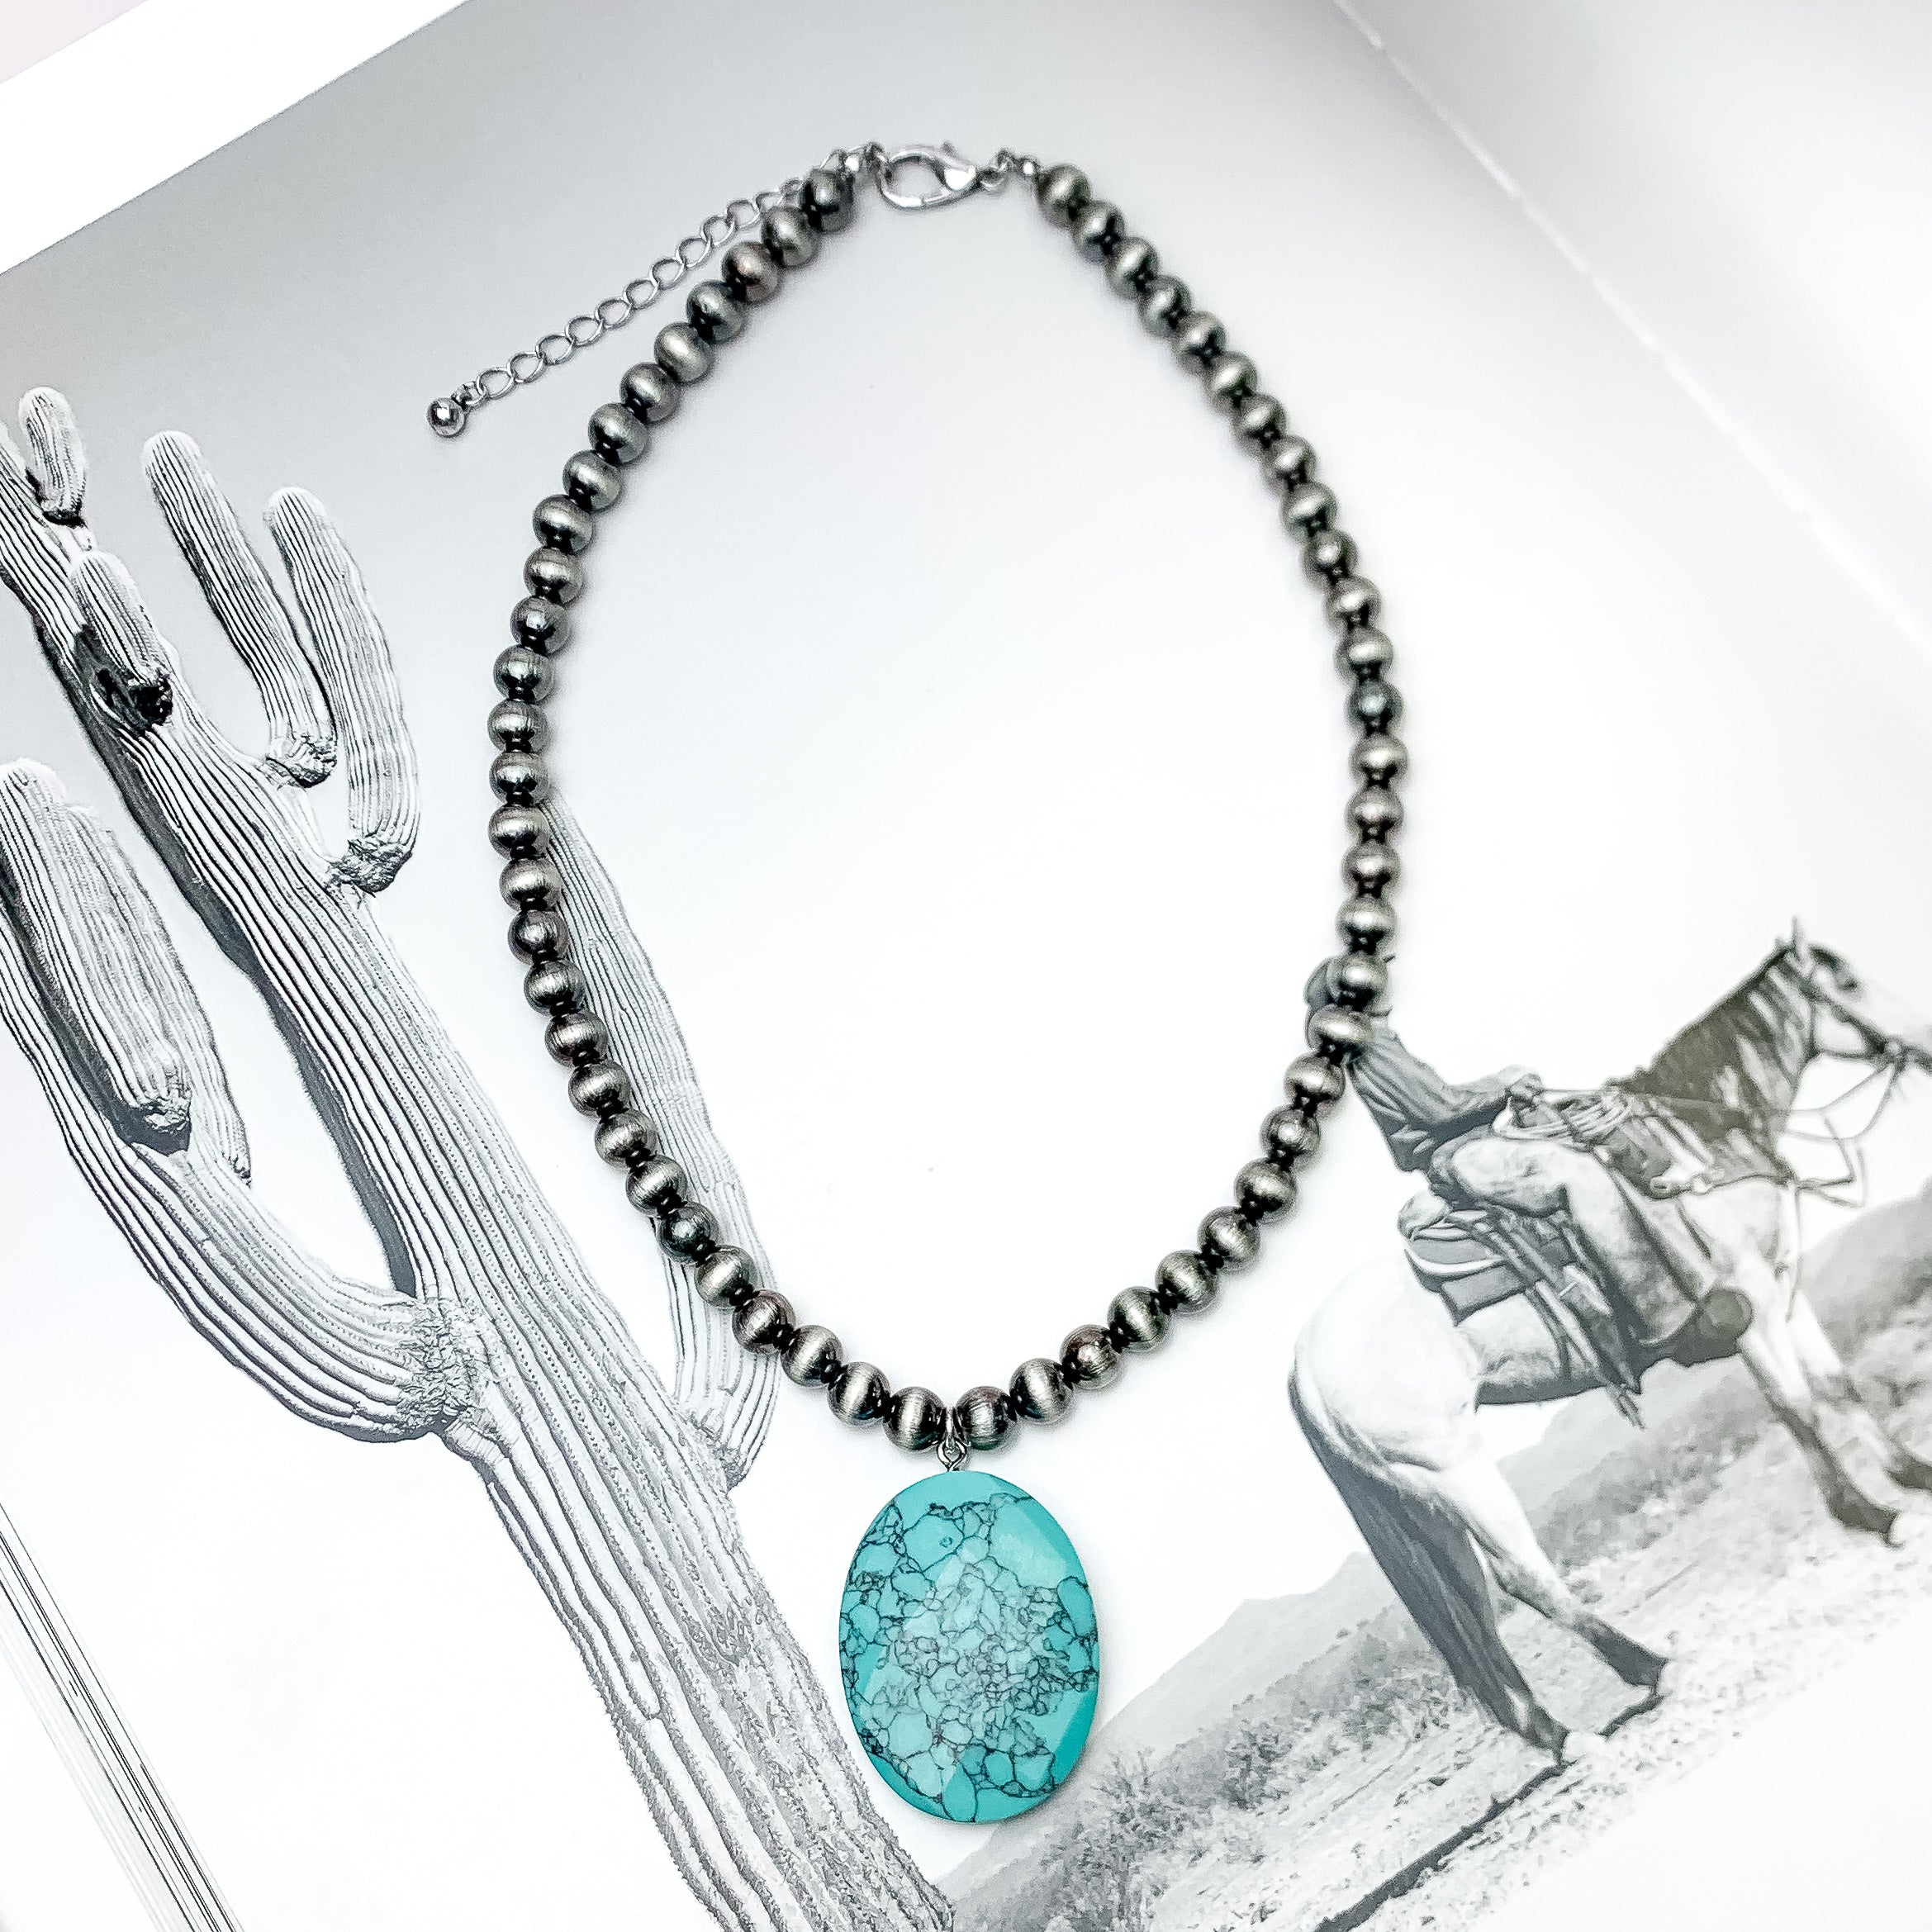 Silver Tone Beaded Necklace With Turquoise Stone. Pictured on a western themed background.